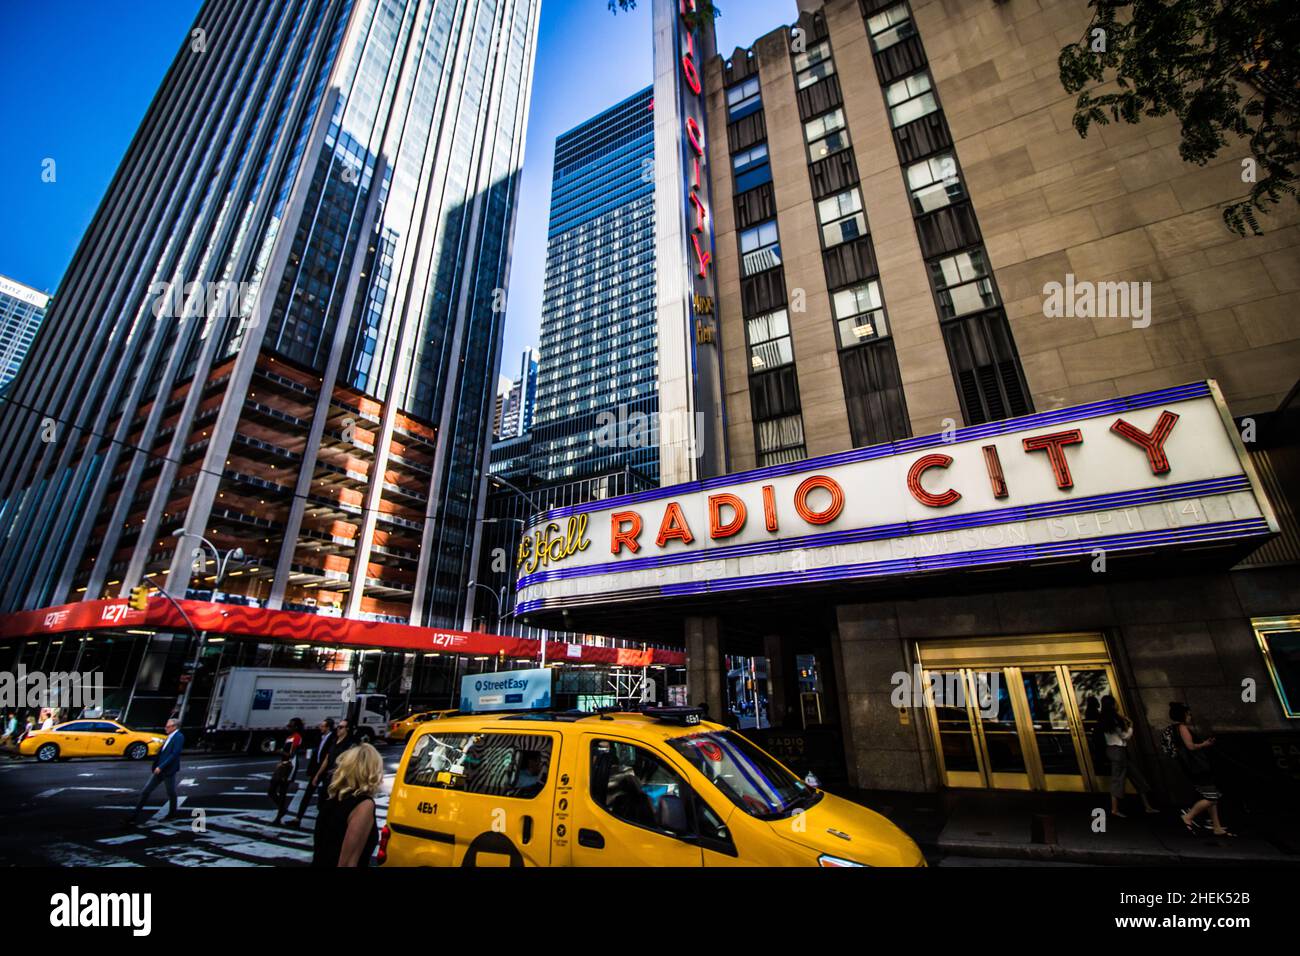 Radio City Music Hall is an entertainment venue at 1260 Avenue of the Americas, within Rockefeller Center, in Midtown Manhattan, New York City. Stock Photo